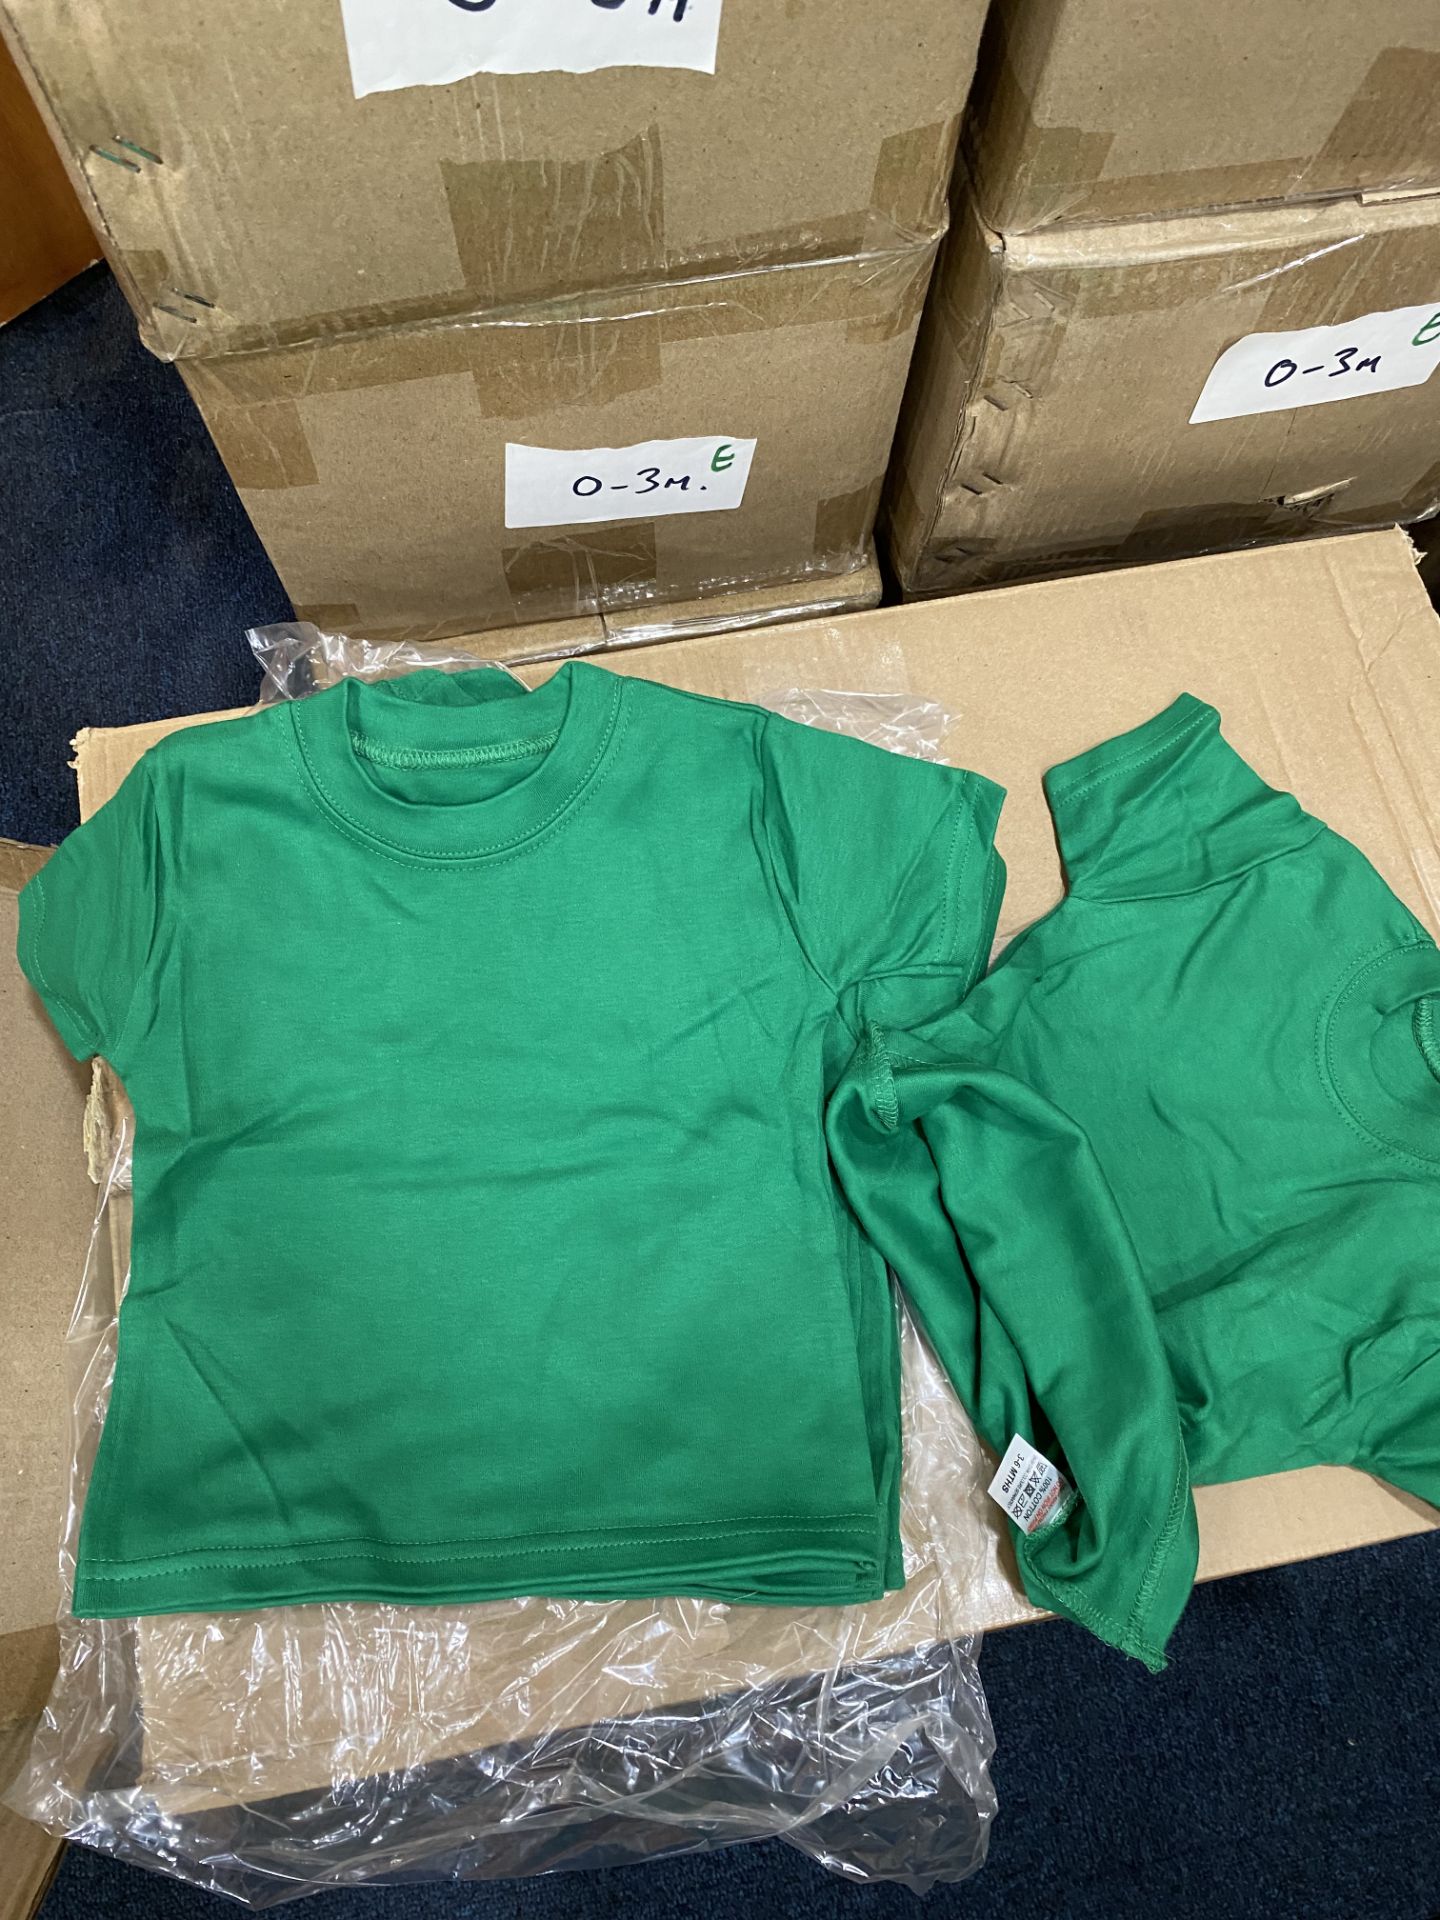 X50 GREEN BABY TSHIRTS - 0-3 MONTHS - 100% COTTON - RRP £200 - Image 3 of 3